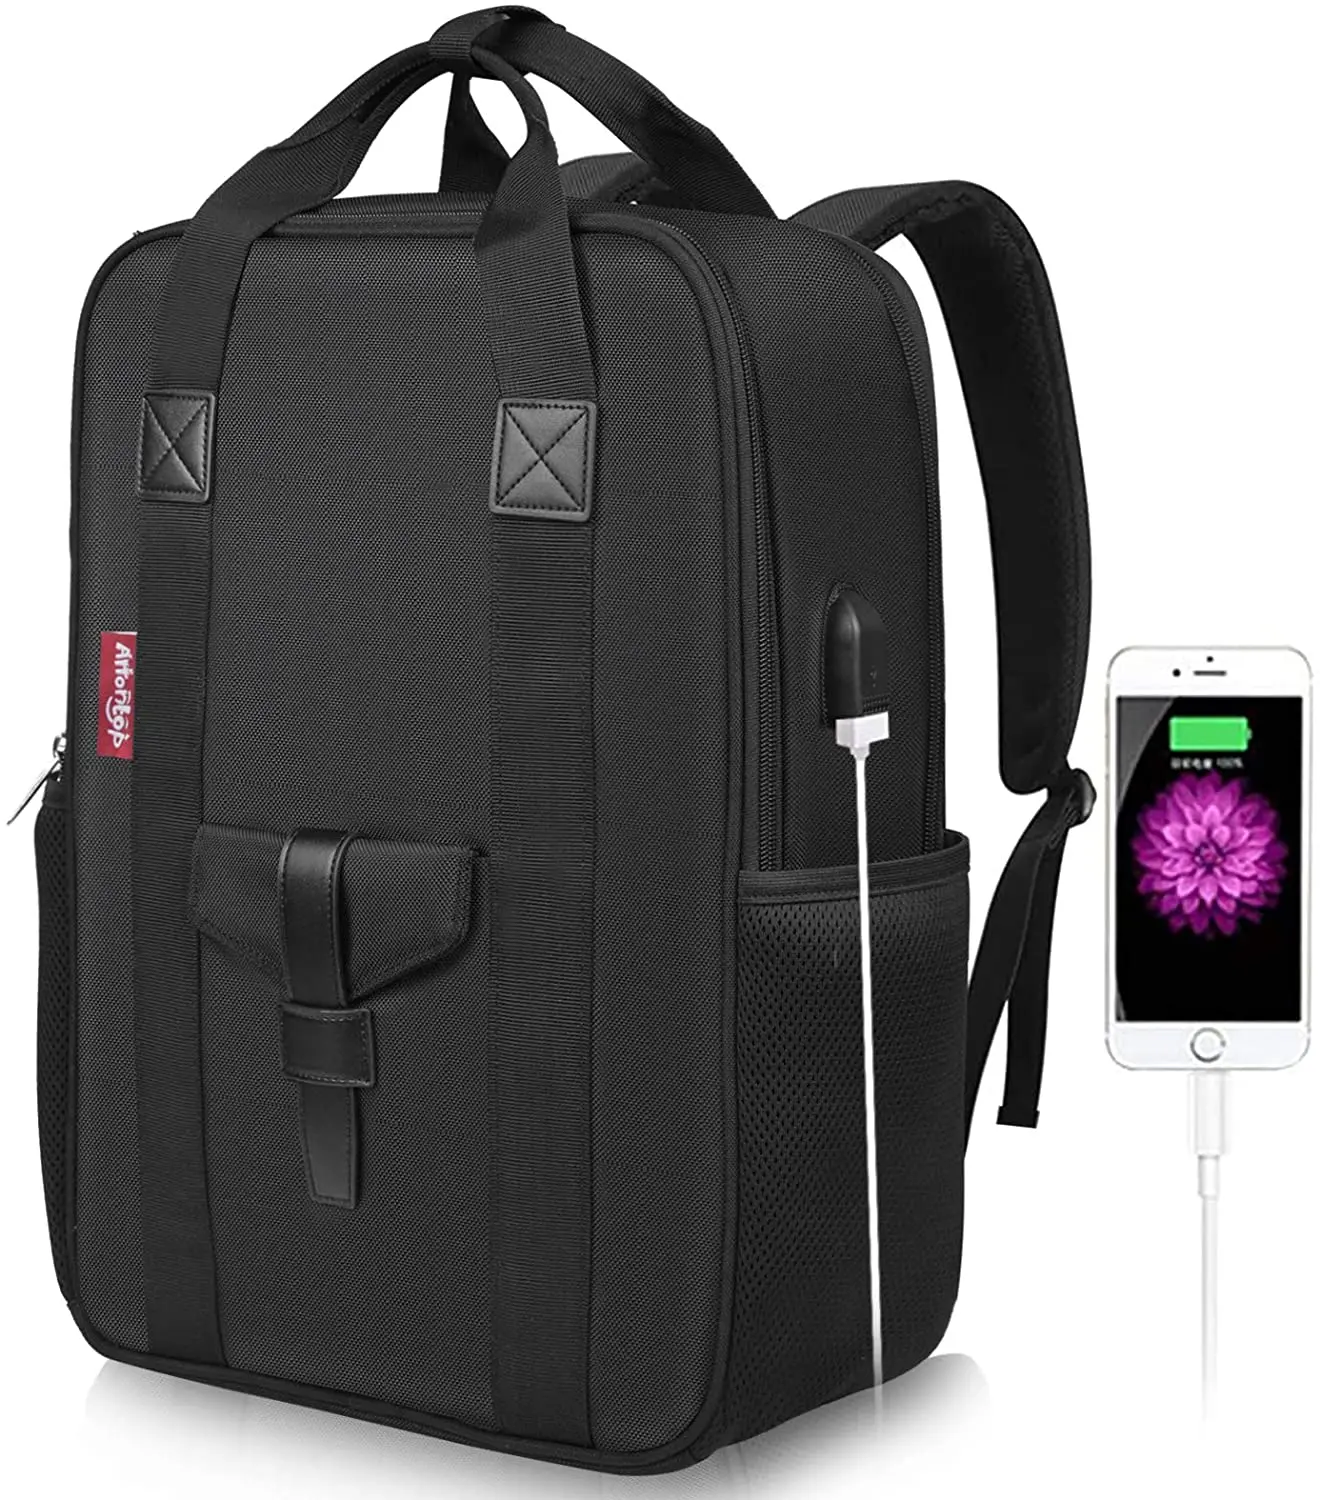 

Arrontop Large Business Laptop Backpack 15.6 inch with USB Charging Port Anti-Theft Durable Travel Bag Waterproof Casual School, Black